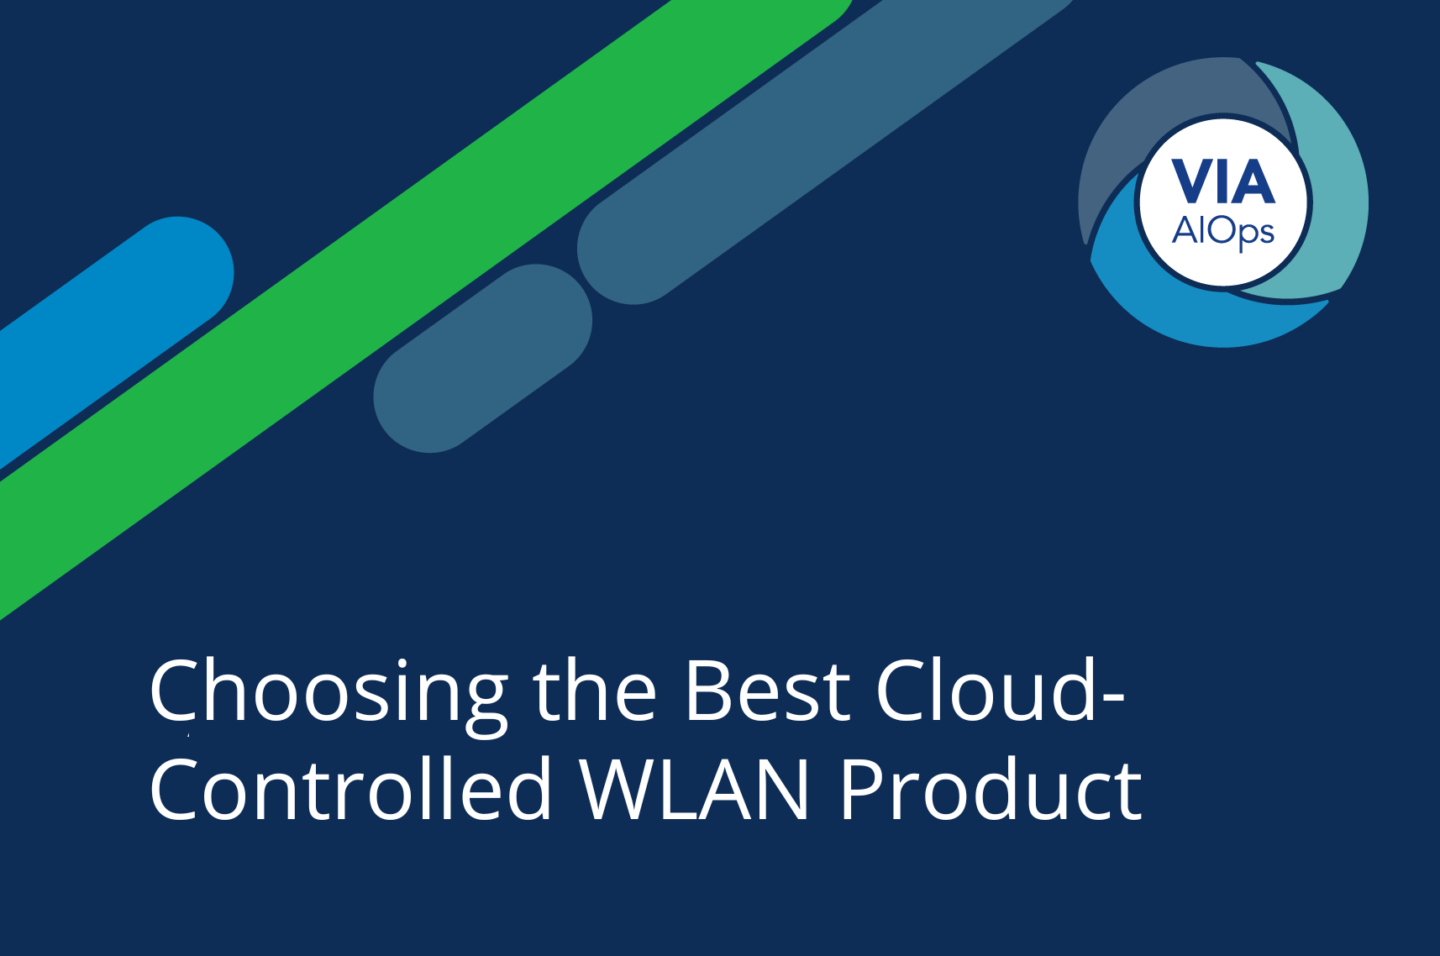 Choosing the Best Cloud-Controlled WLAN Product